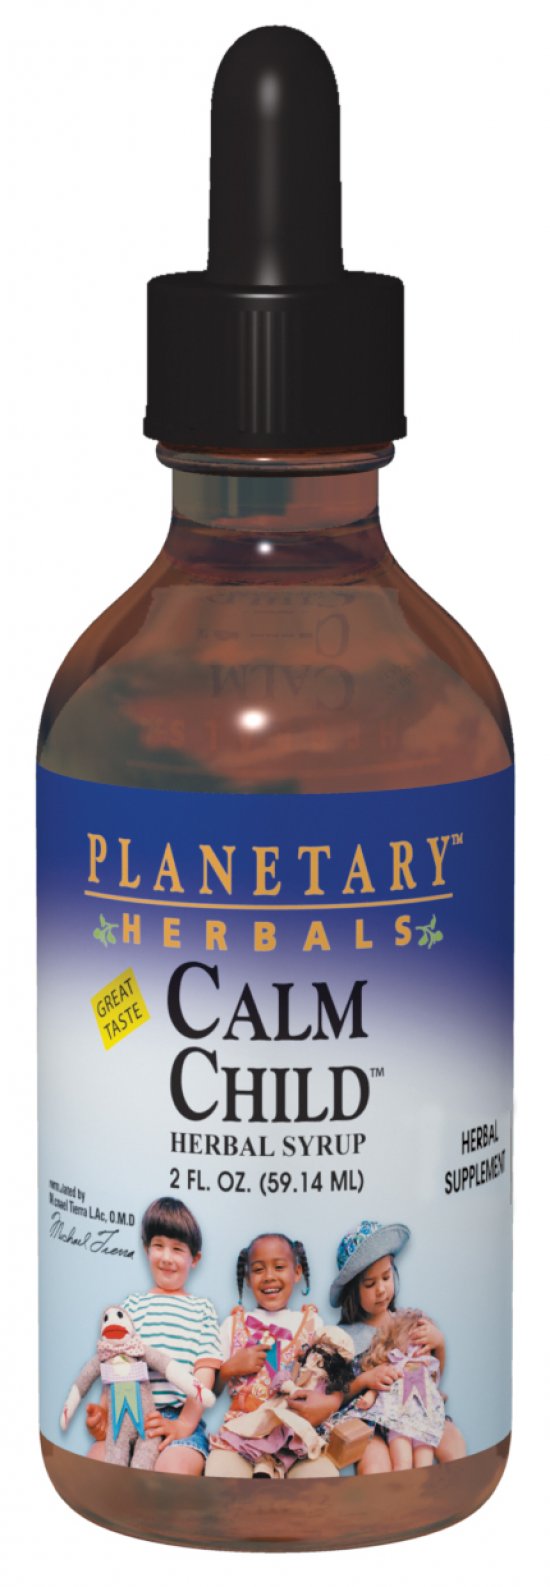 Product Listing Image for Planetary Herbals Calm Child Syrup